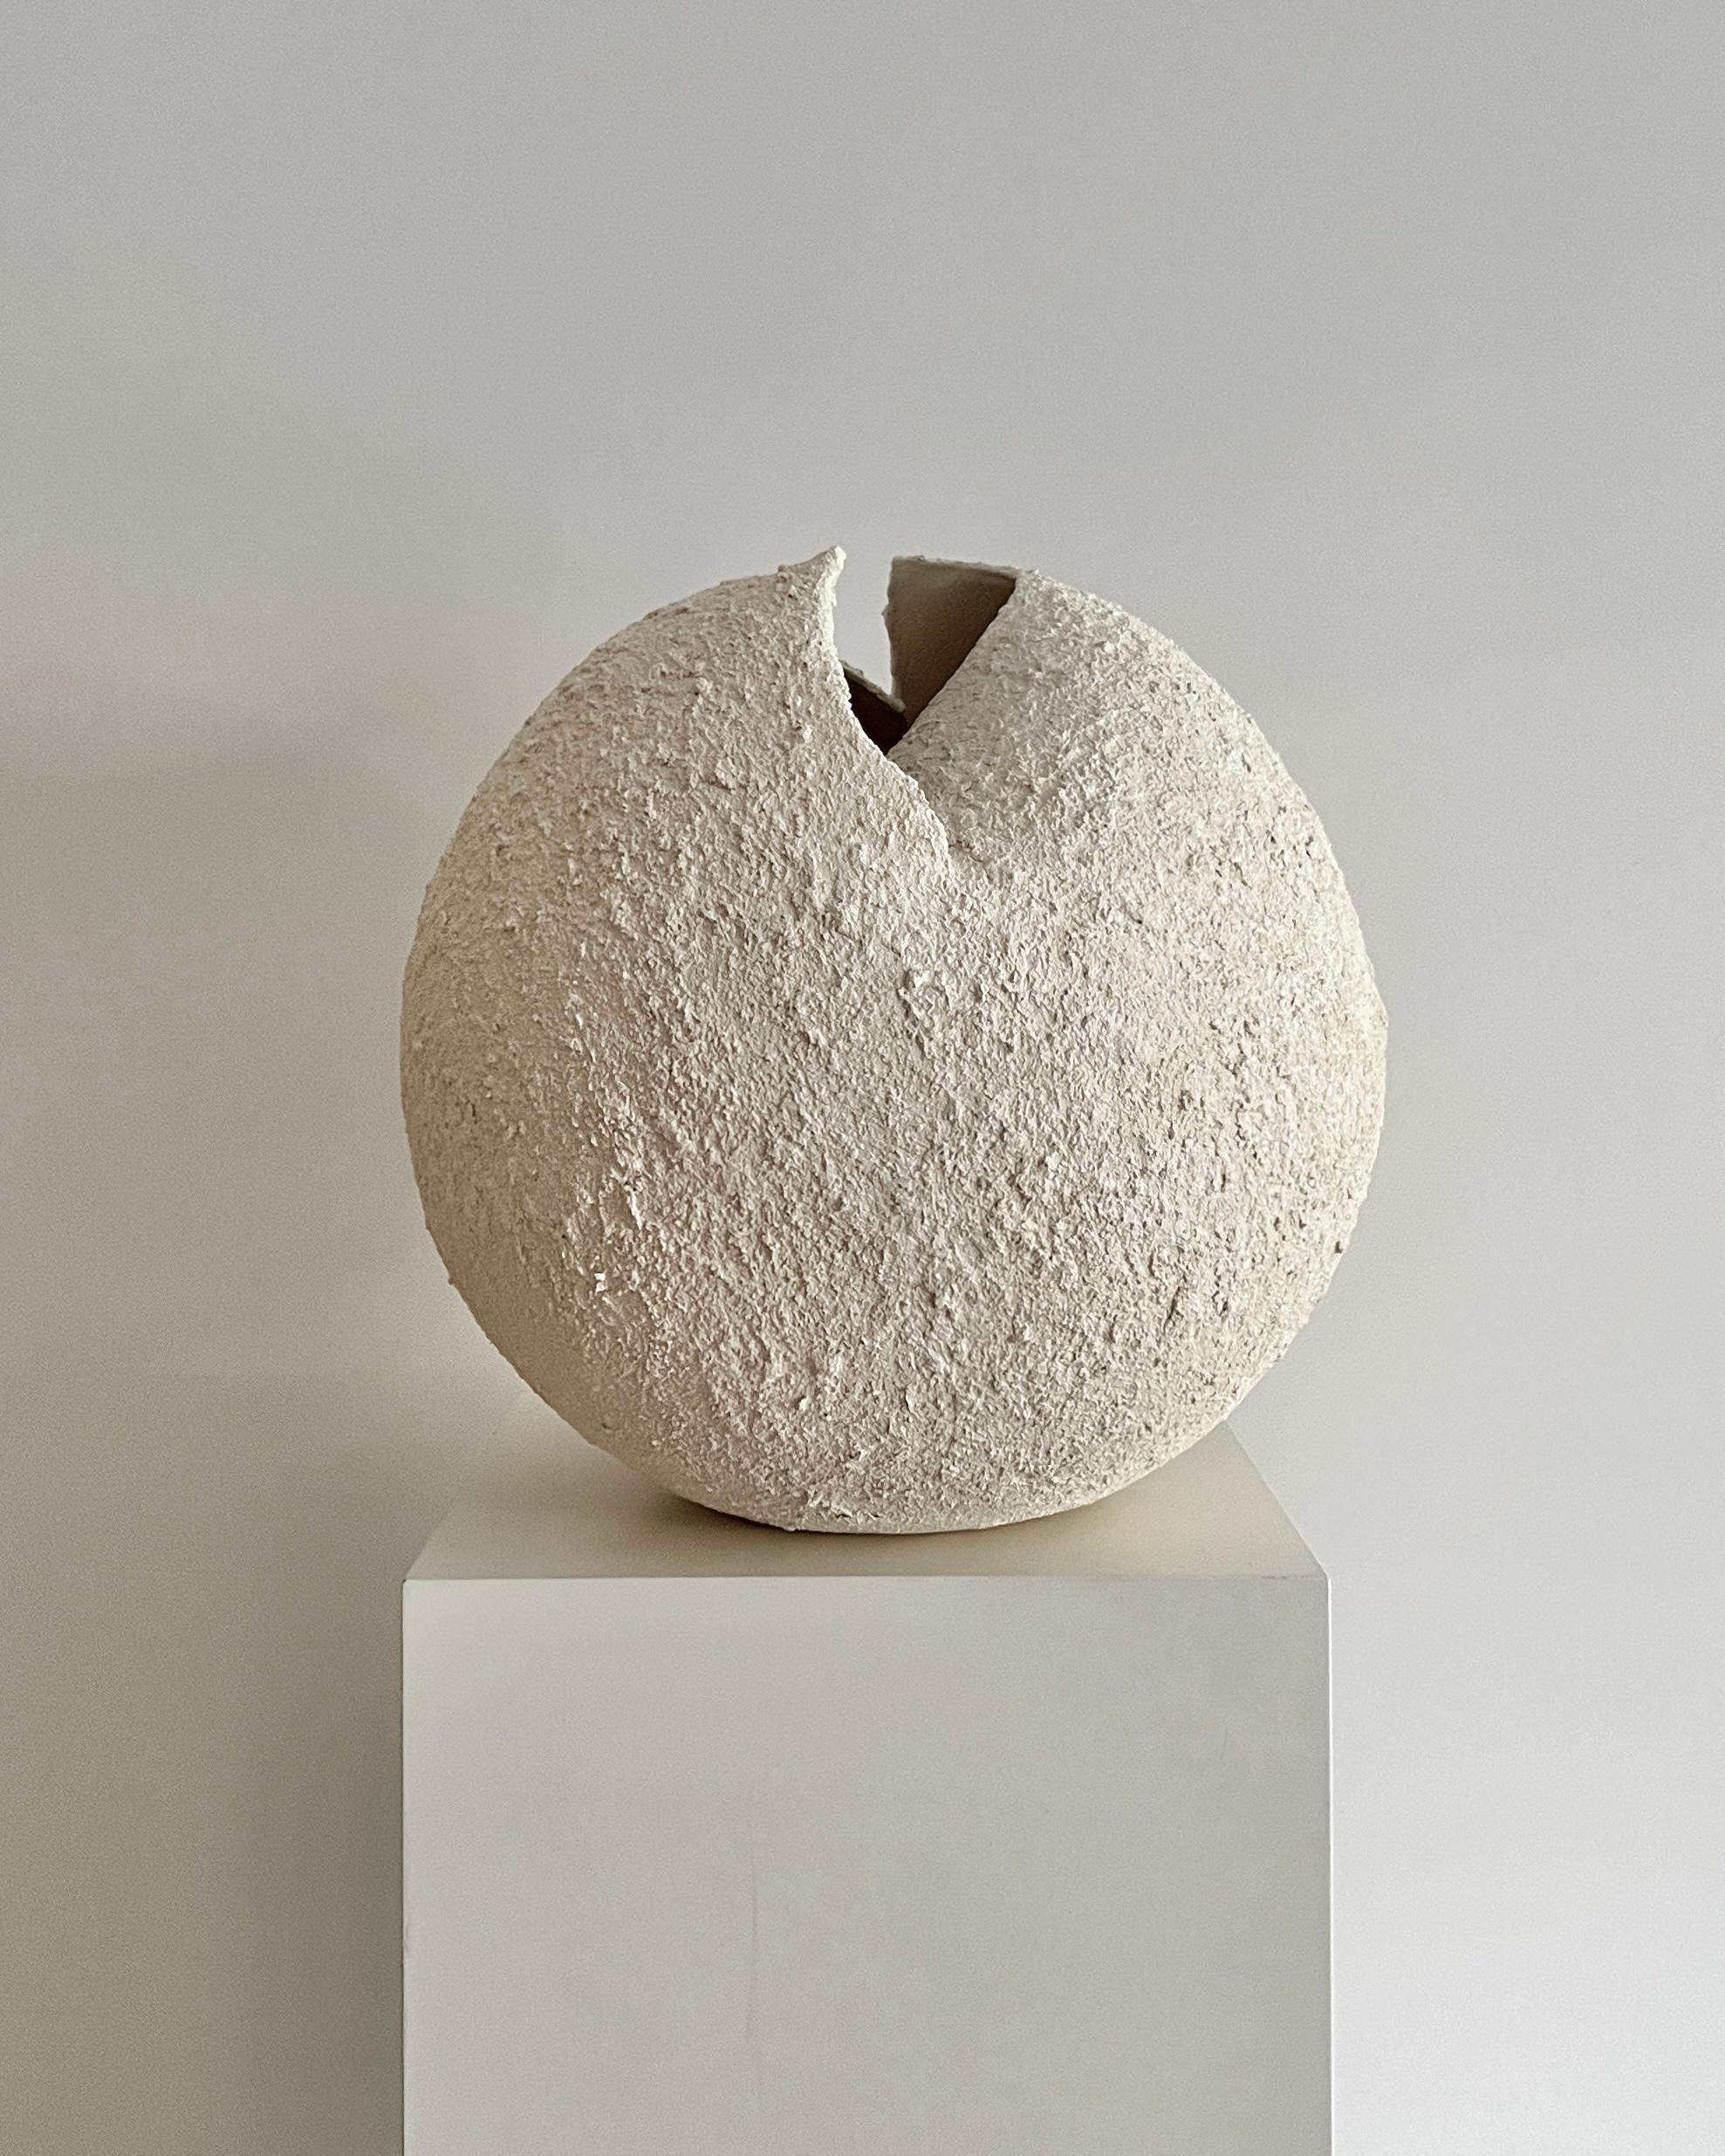 Grain Sculpture by Laura Pasquino
One of a Kind
Dimensions: D 37 cm x H 38 cm
Material: Ceramic
Finishing: Textured, Unglazed
Artist stamp on the bottom
 
Laura Pasquino
Incorporating references from ancient Korean ceramics as well as principles of